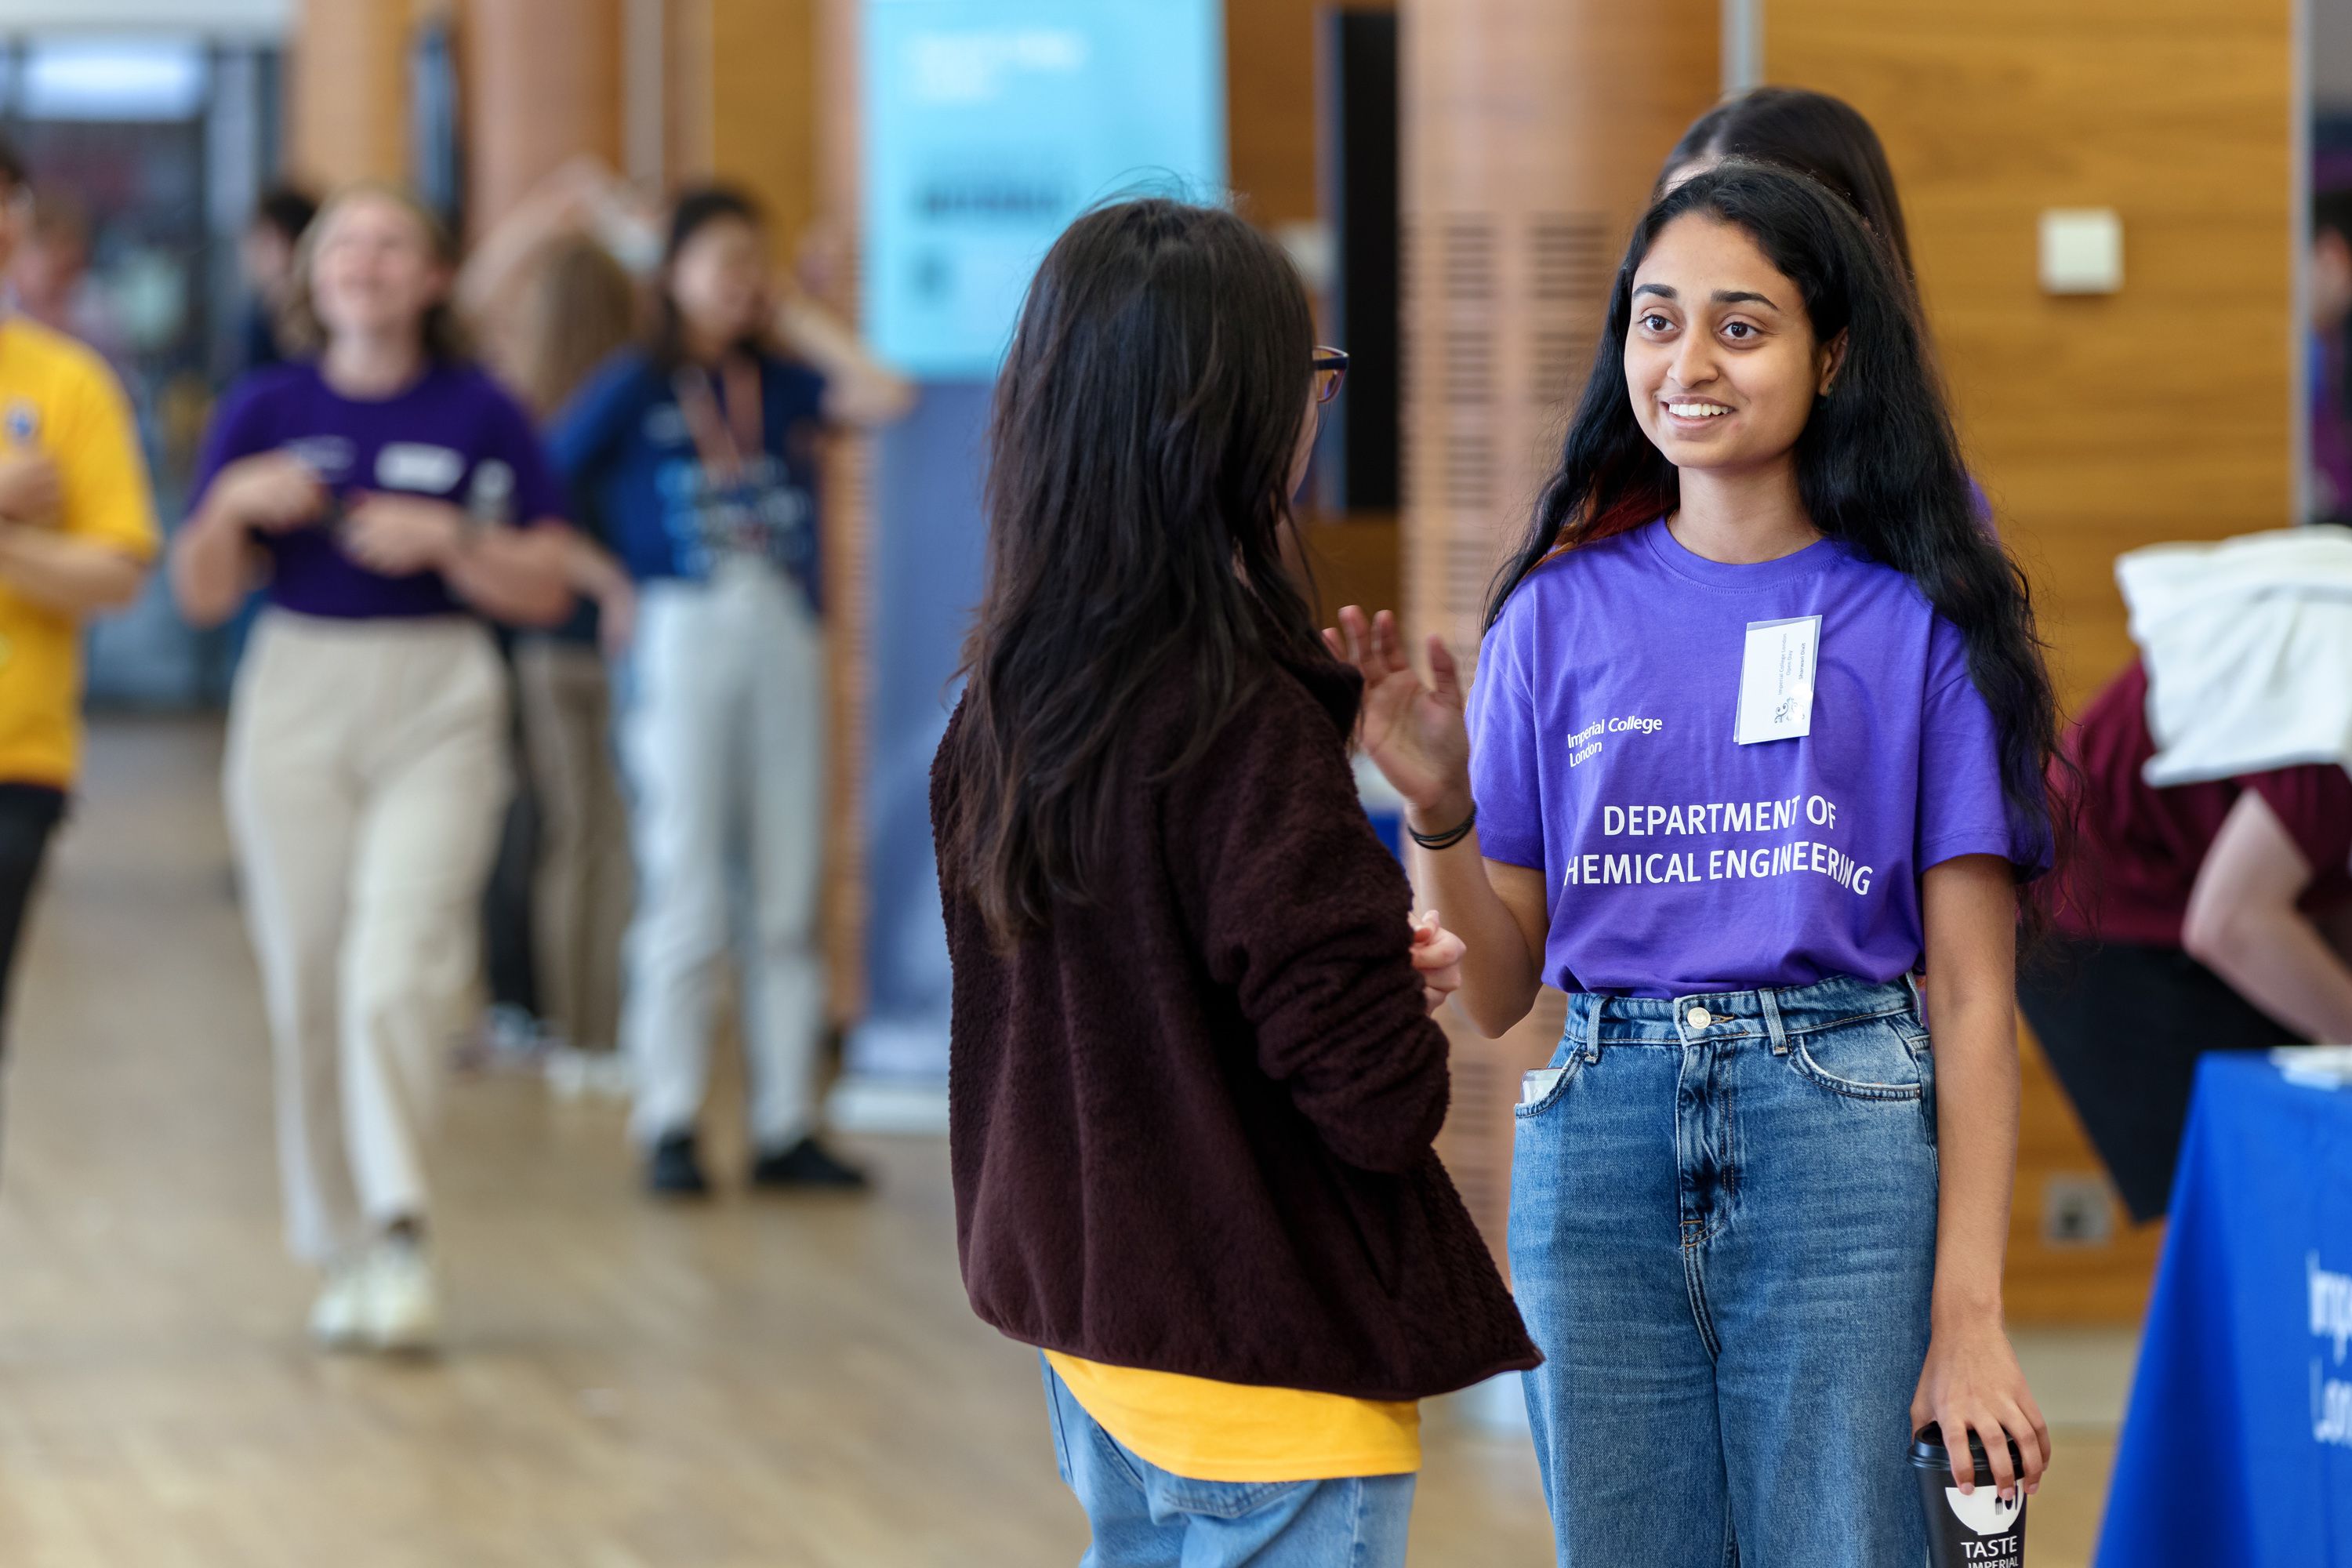 A woman in a purple Department of Chemical Engineering T-shirt speaks to a prospective student